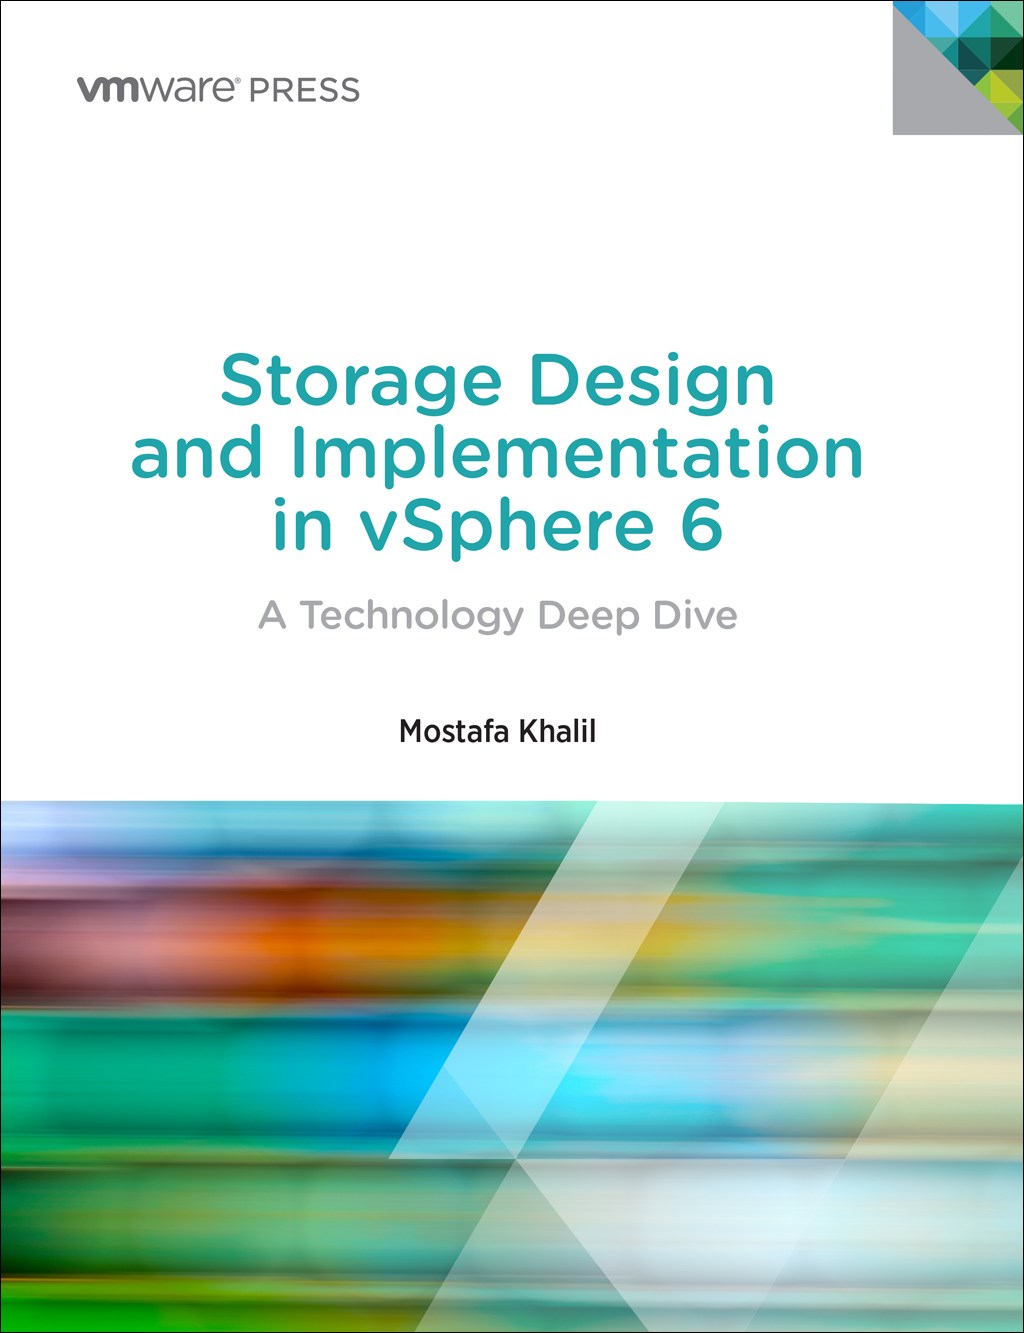 Storage Design and Implementation in vSphere 6: A Technology Deep Dive, 2nd Edition